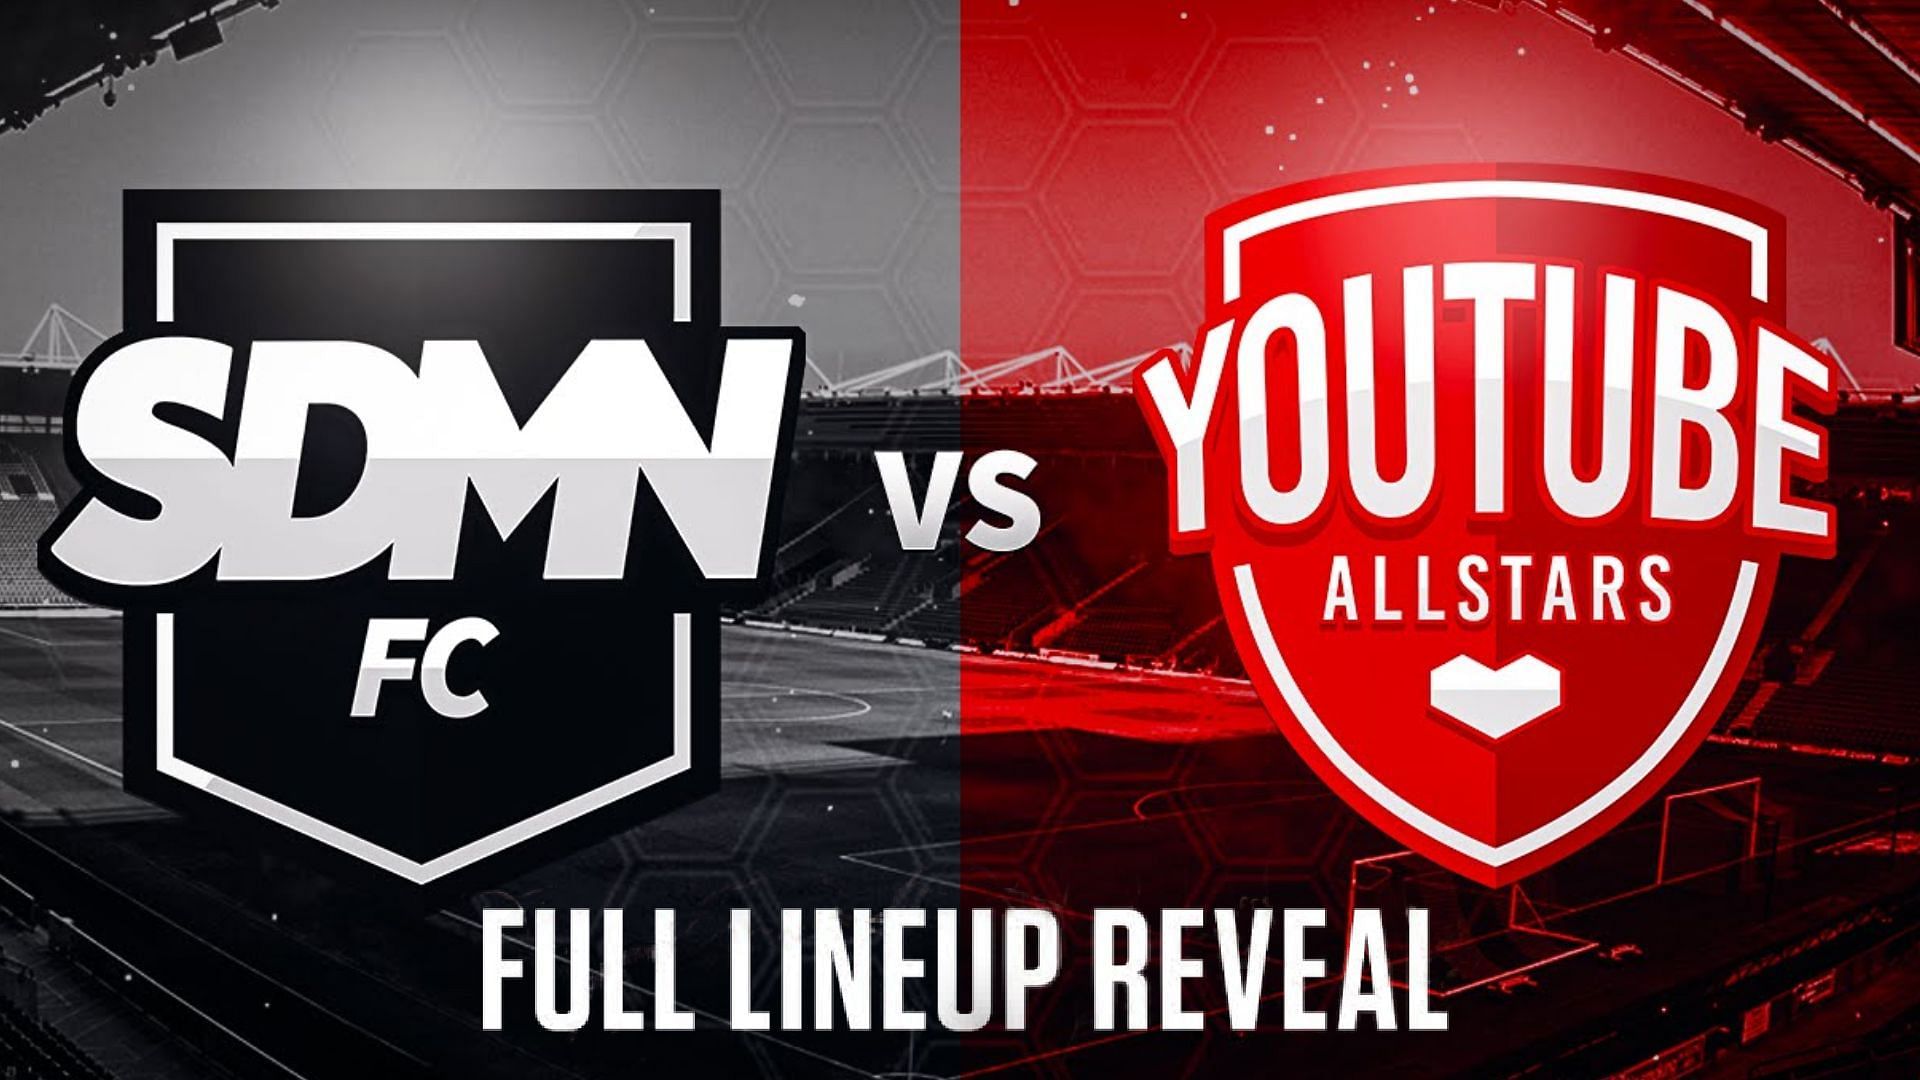 Entire Sidemen FC and YouTube All Stars squads for charity match revealed